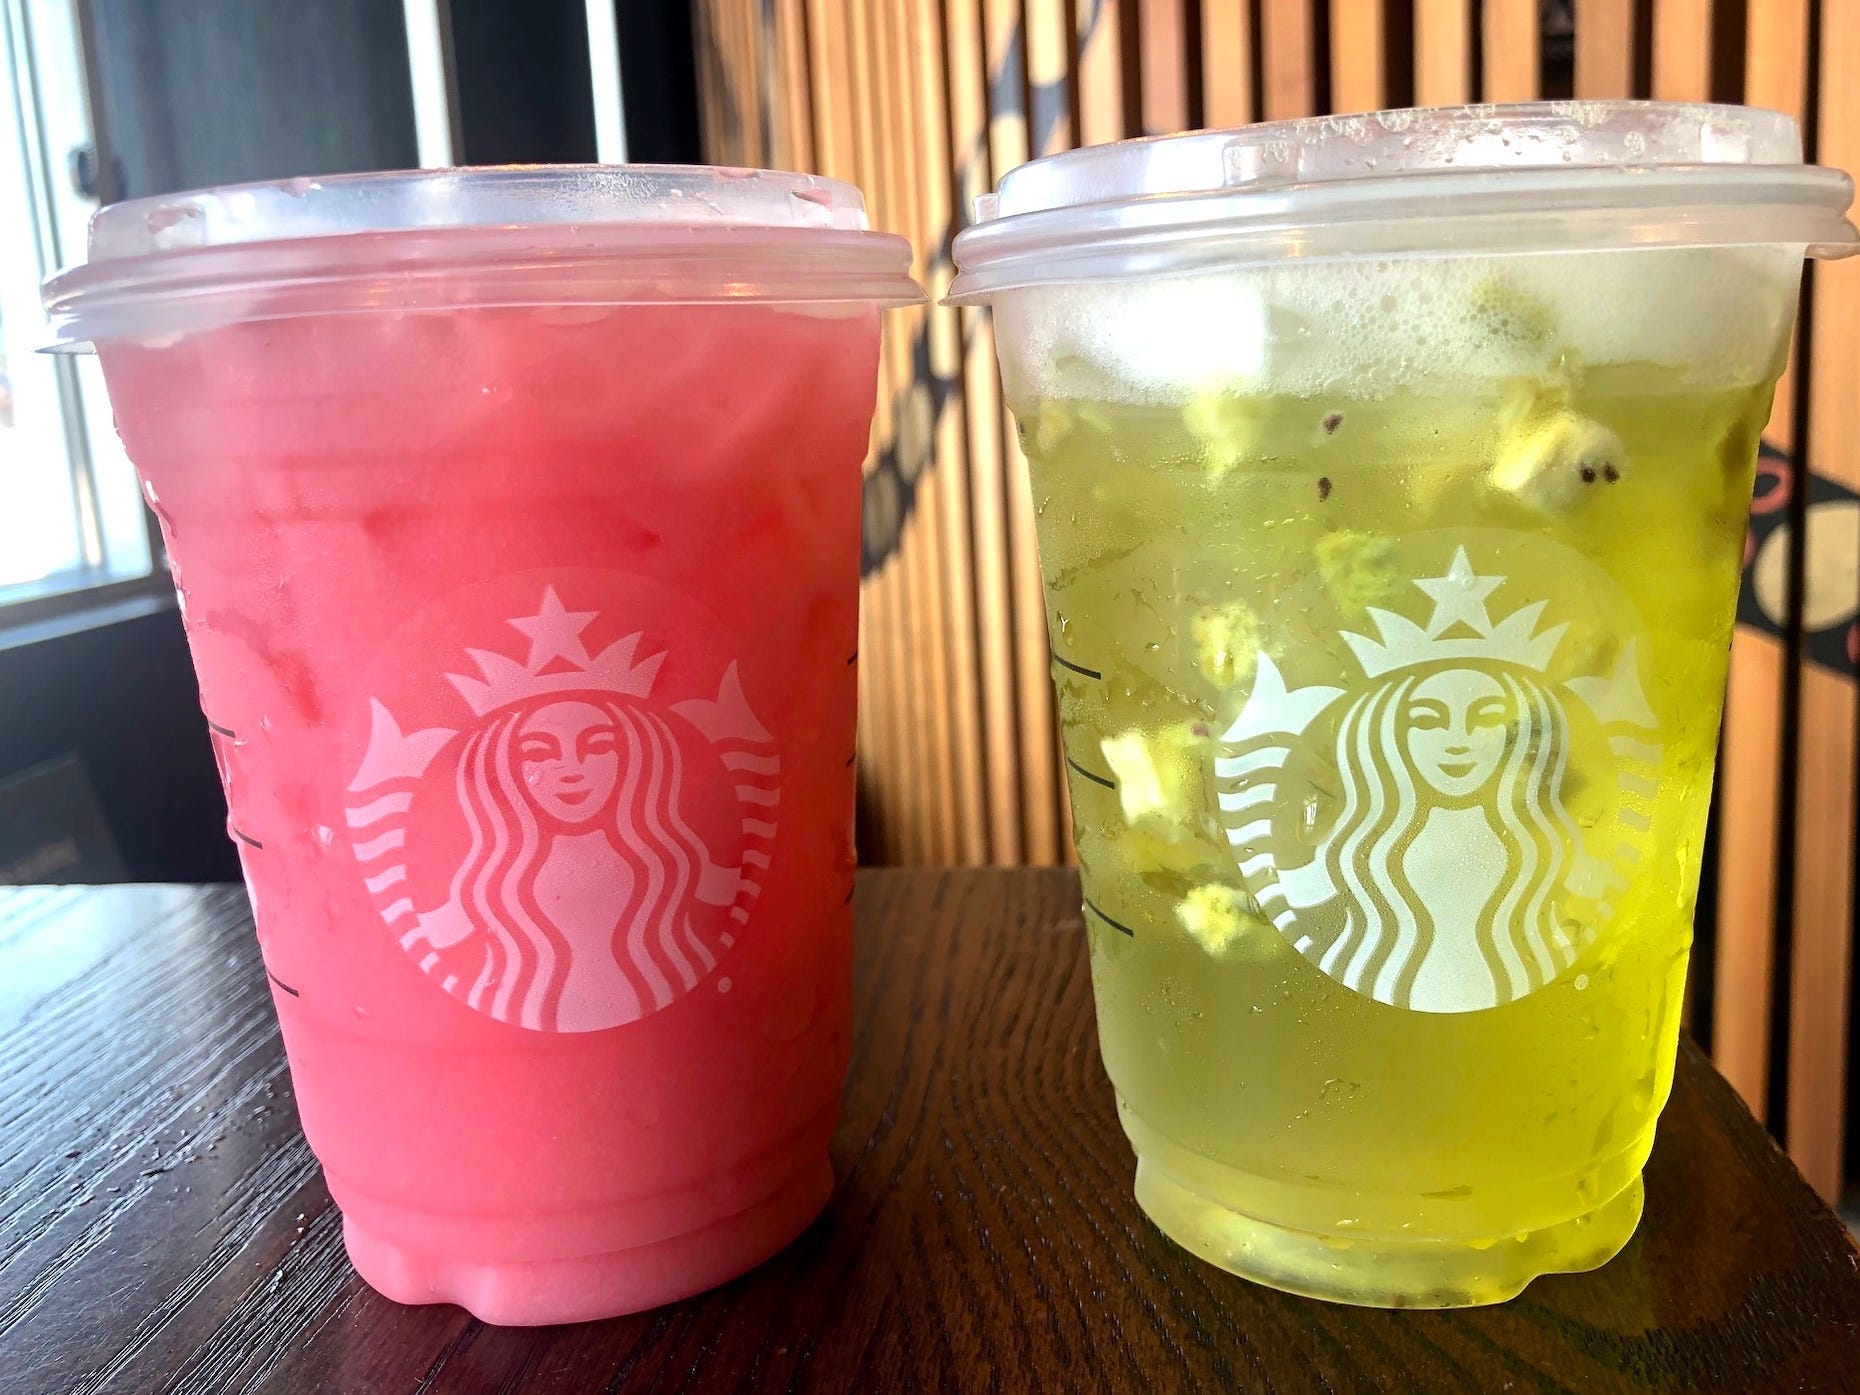 Starbucks' new summer menu is filled with colorful drinks made with